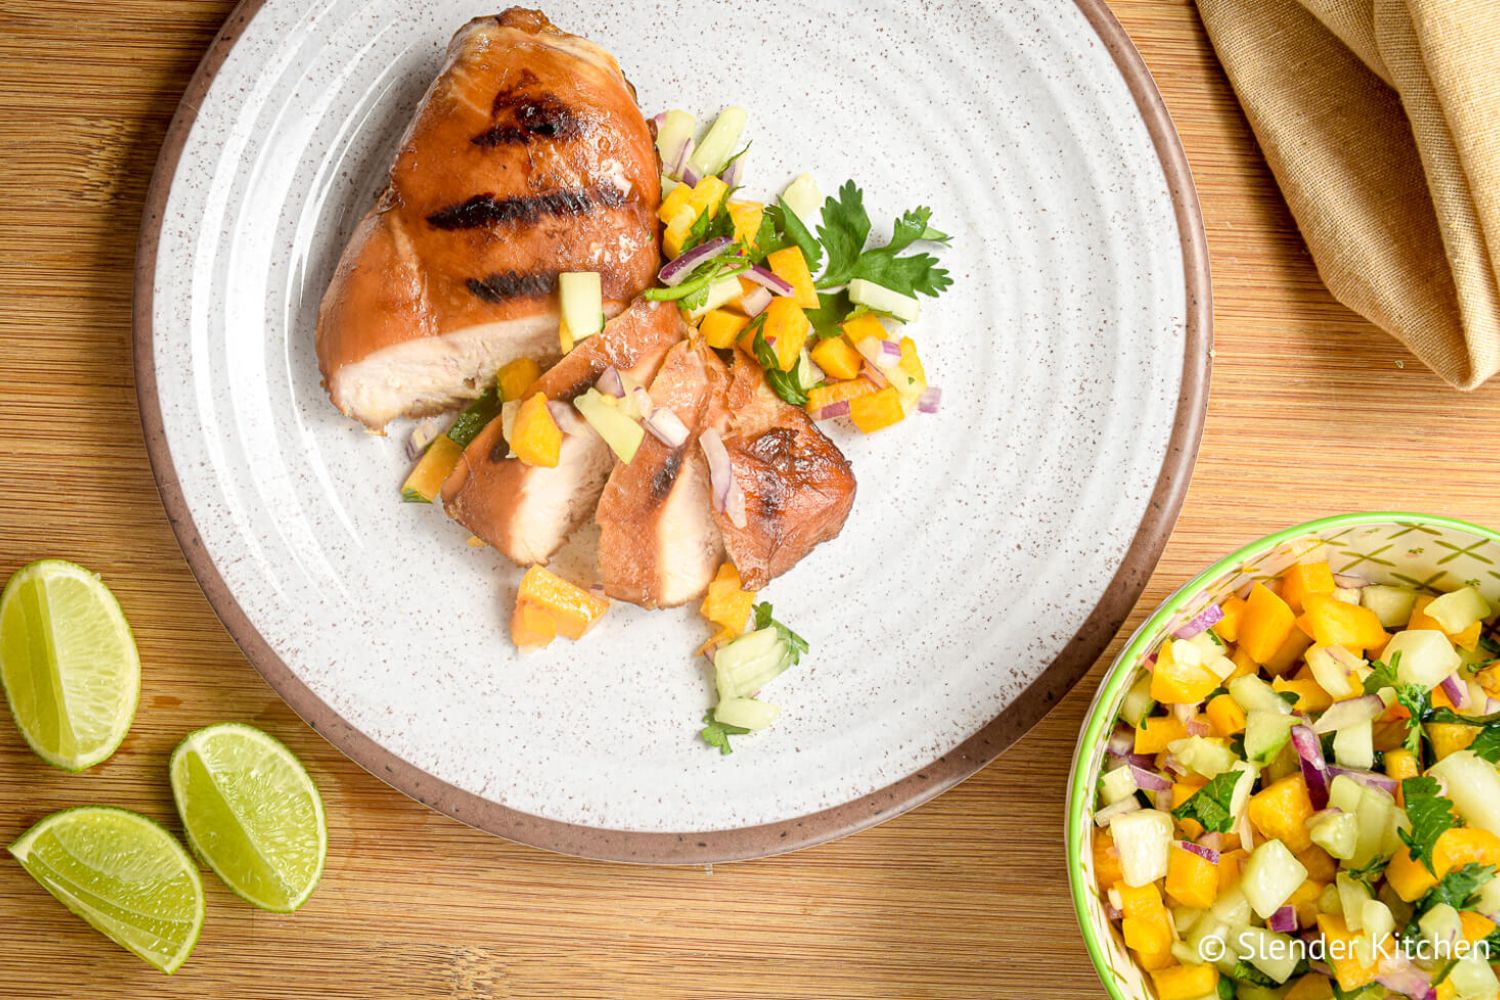 Grilled chicken with peach and cucumber salsa sliced on a plate.